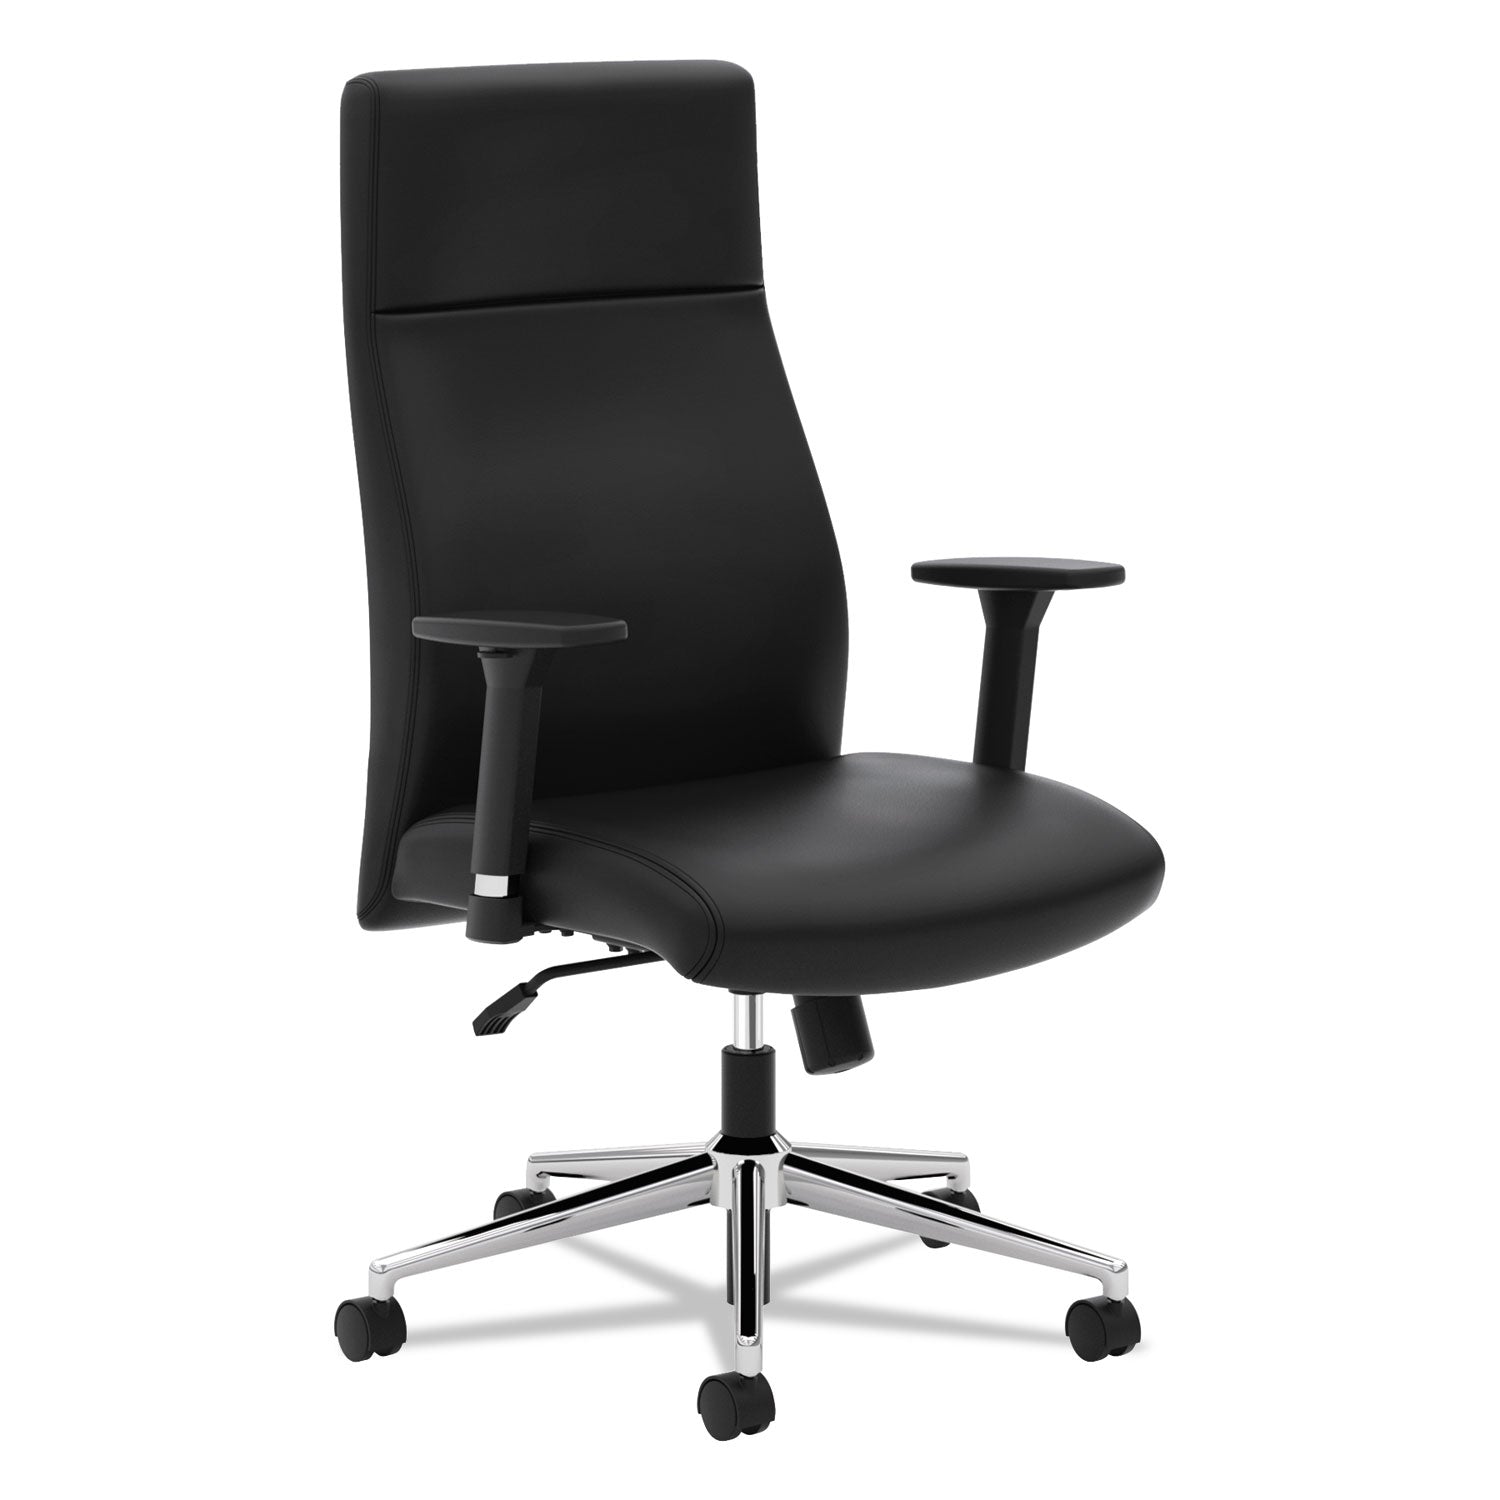 define-executive-high-back-leather-chair-supports-250-lb-17-to-21-seat-height-black-seat-back-polished-chrome-base_bsxvl108sb11 - 1